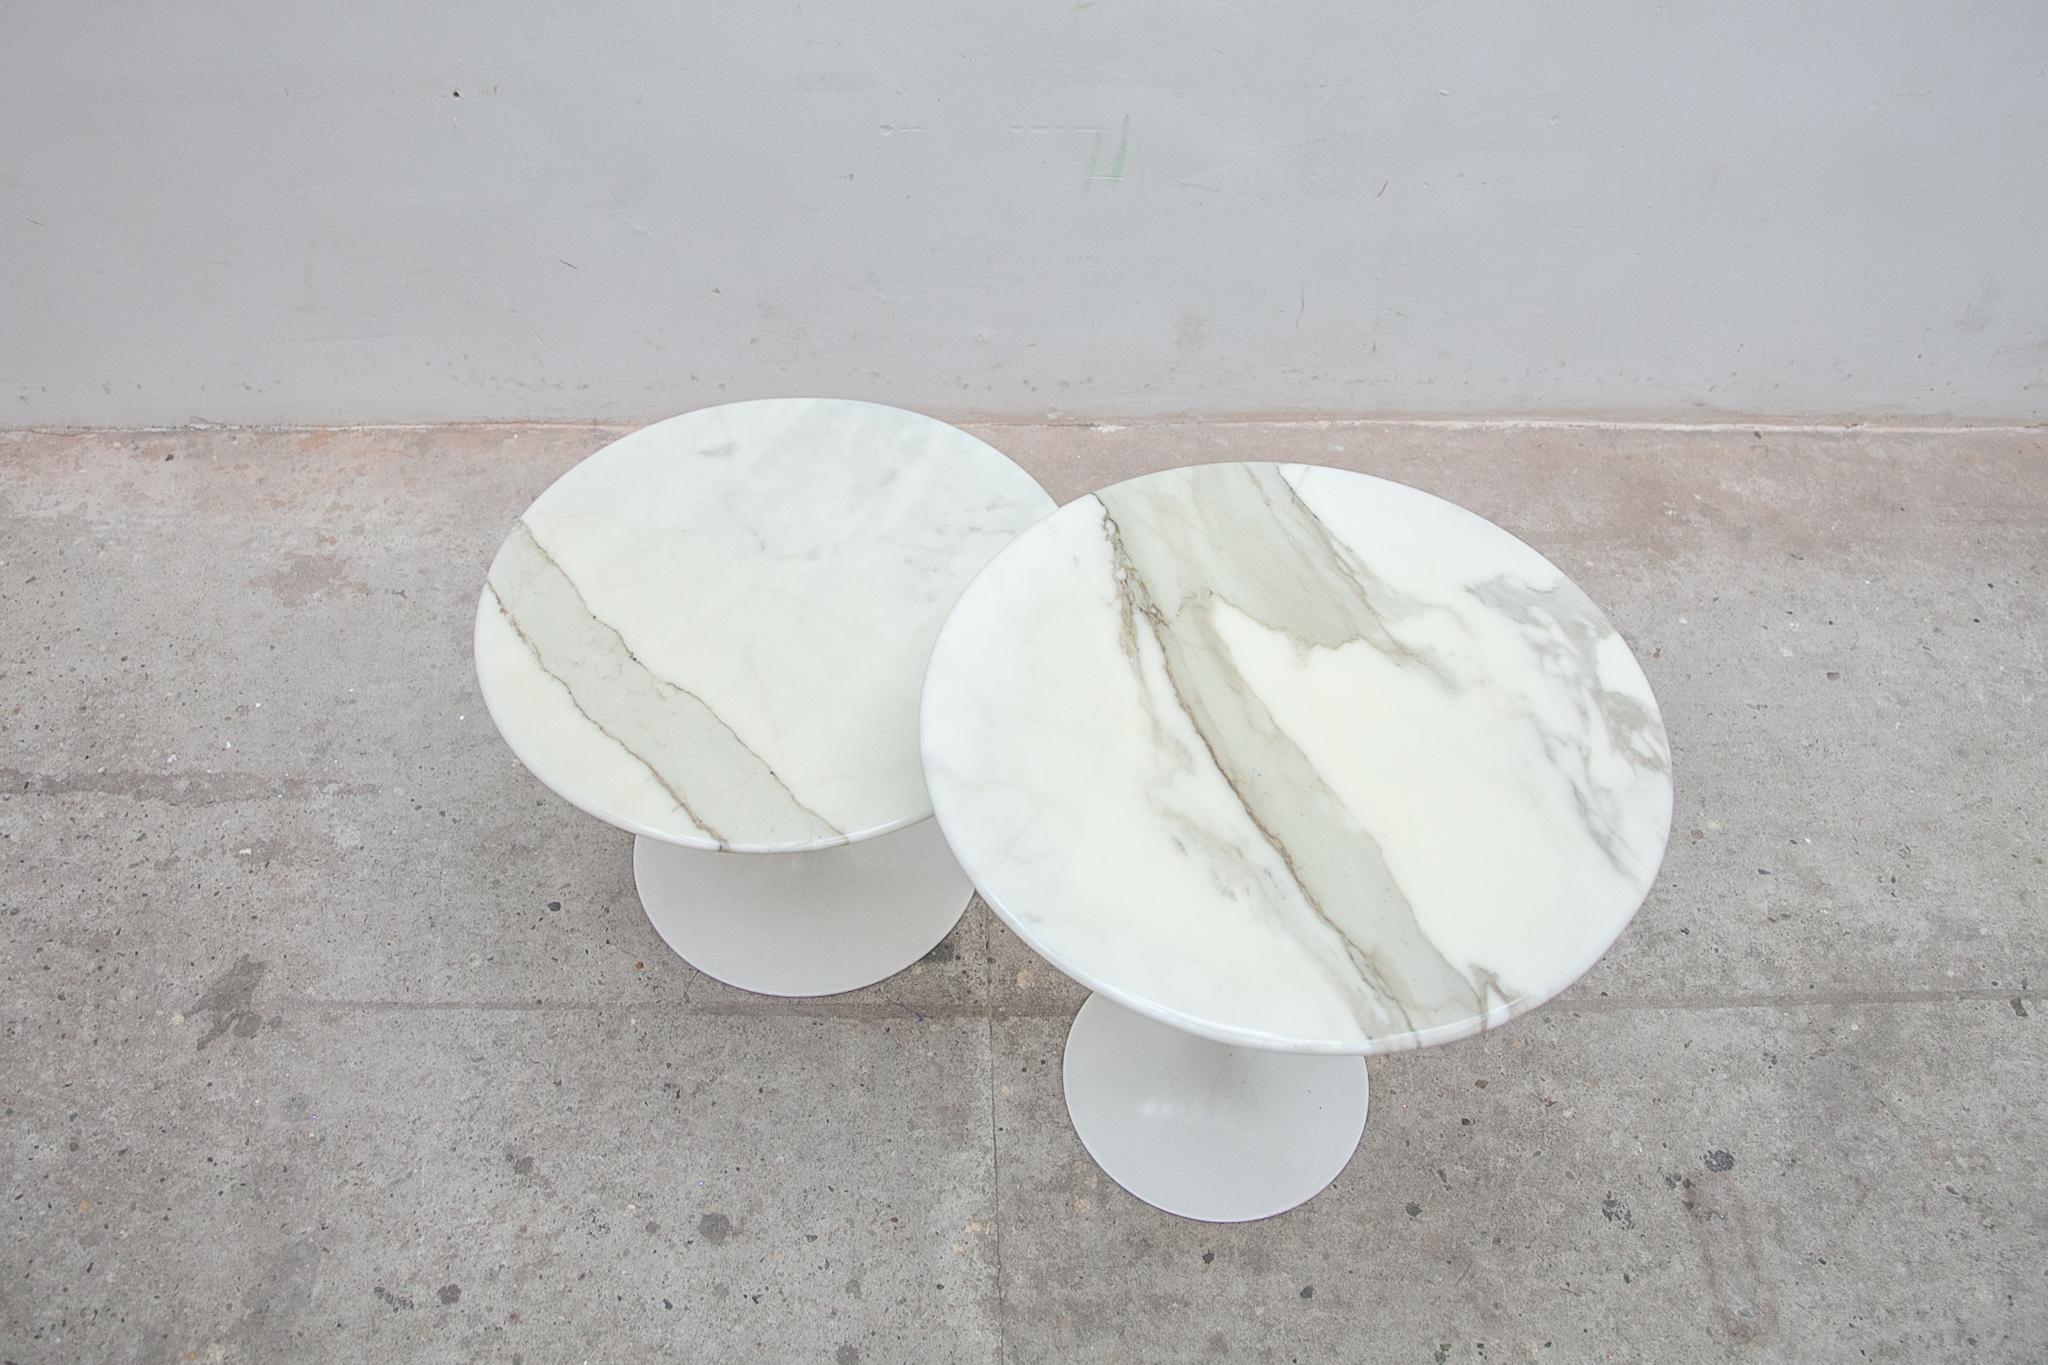 Pair of splendid Tulip coffee tables whit white marble top designed by Eero Saarinen for Knoll. The design of the tulip series dates back to 1956 and has been one of the most sought-after classics in vintage design ever since.
Condition: Very good